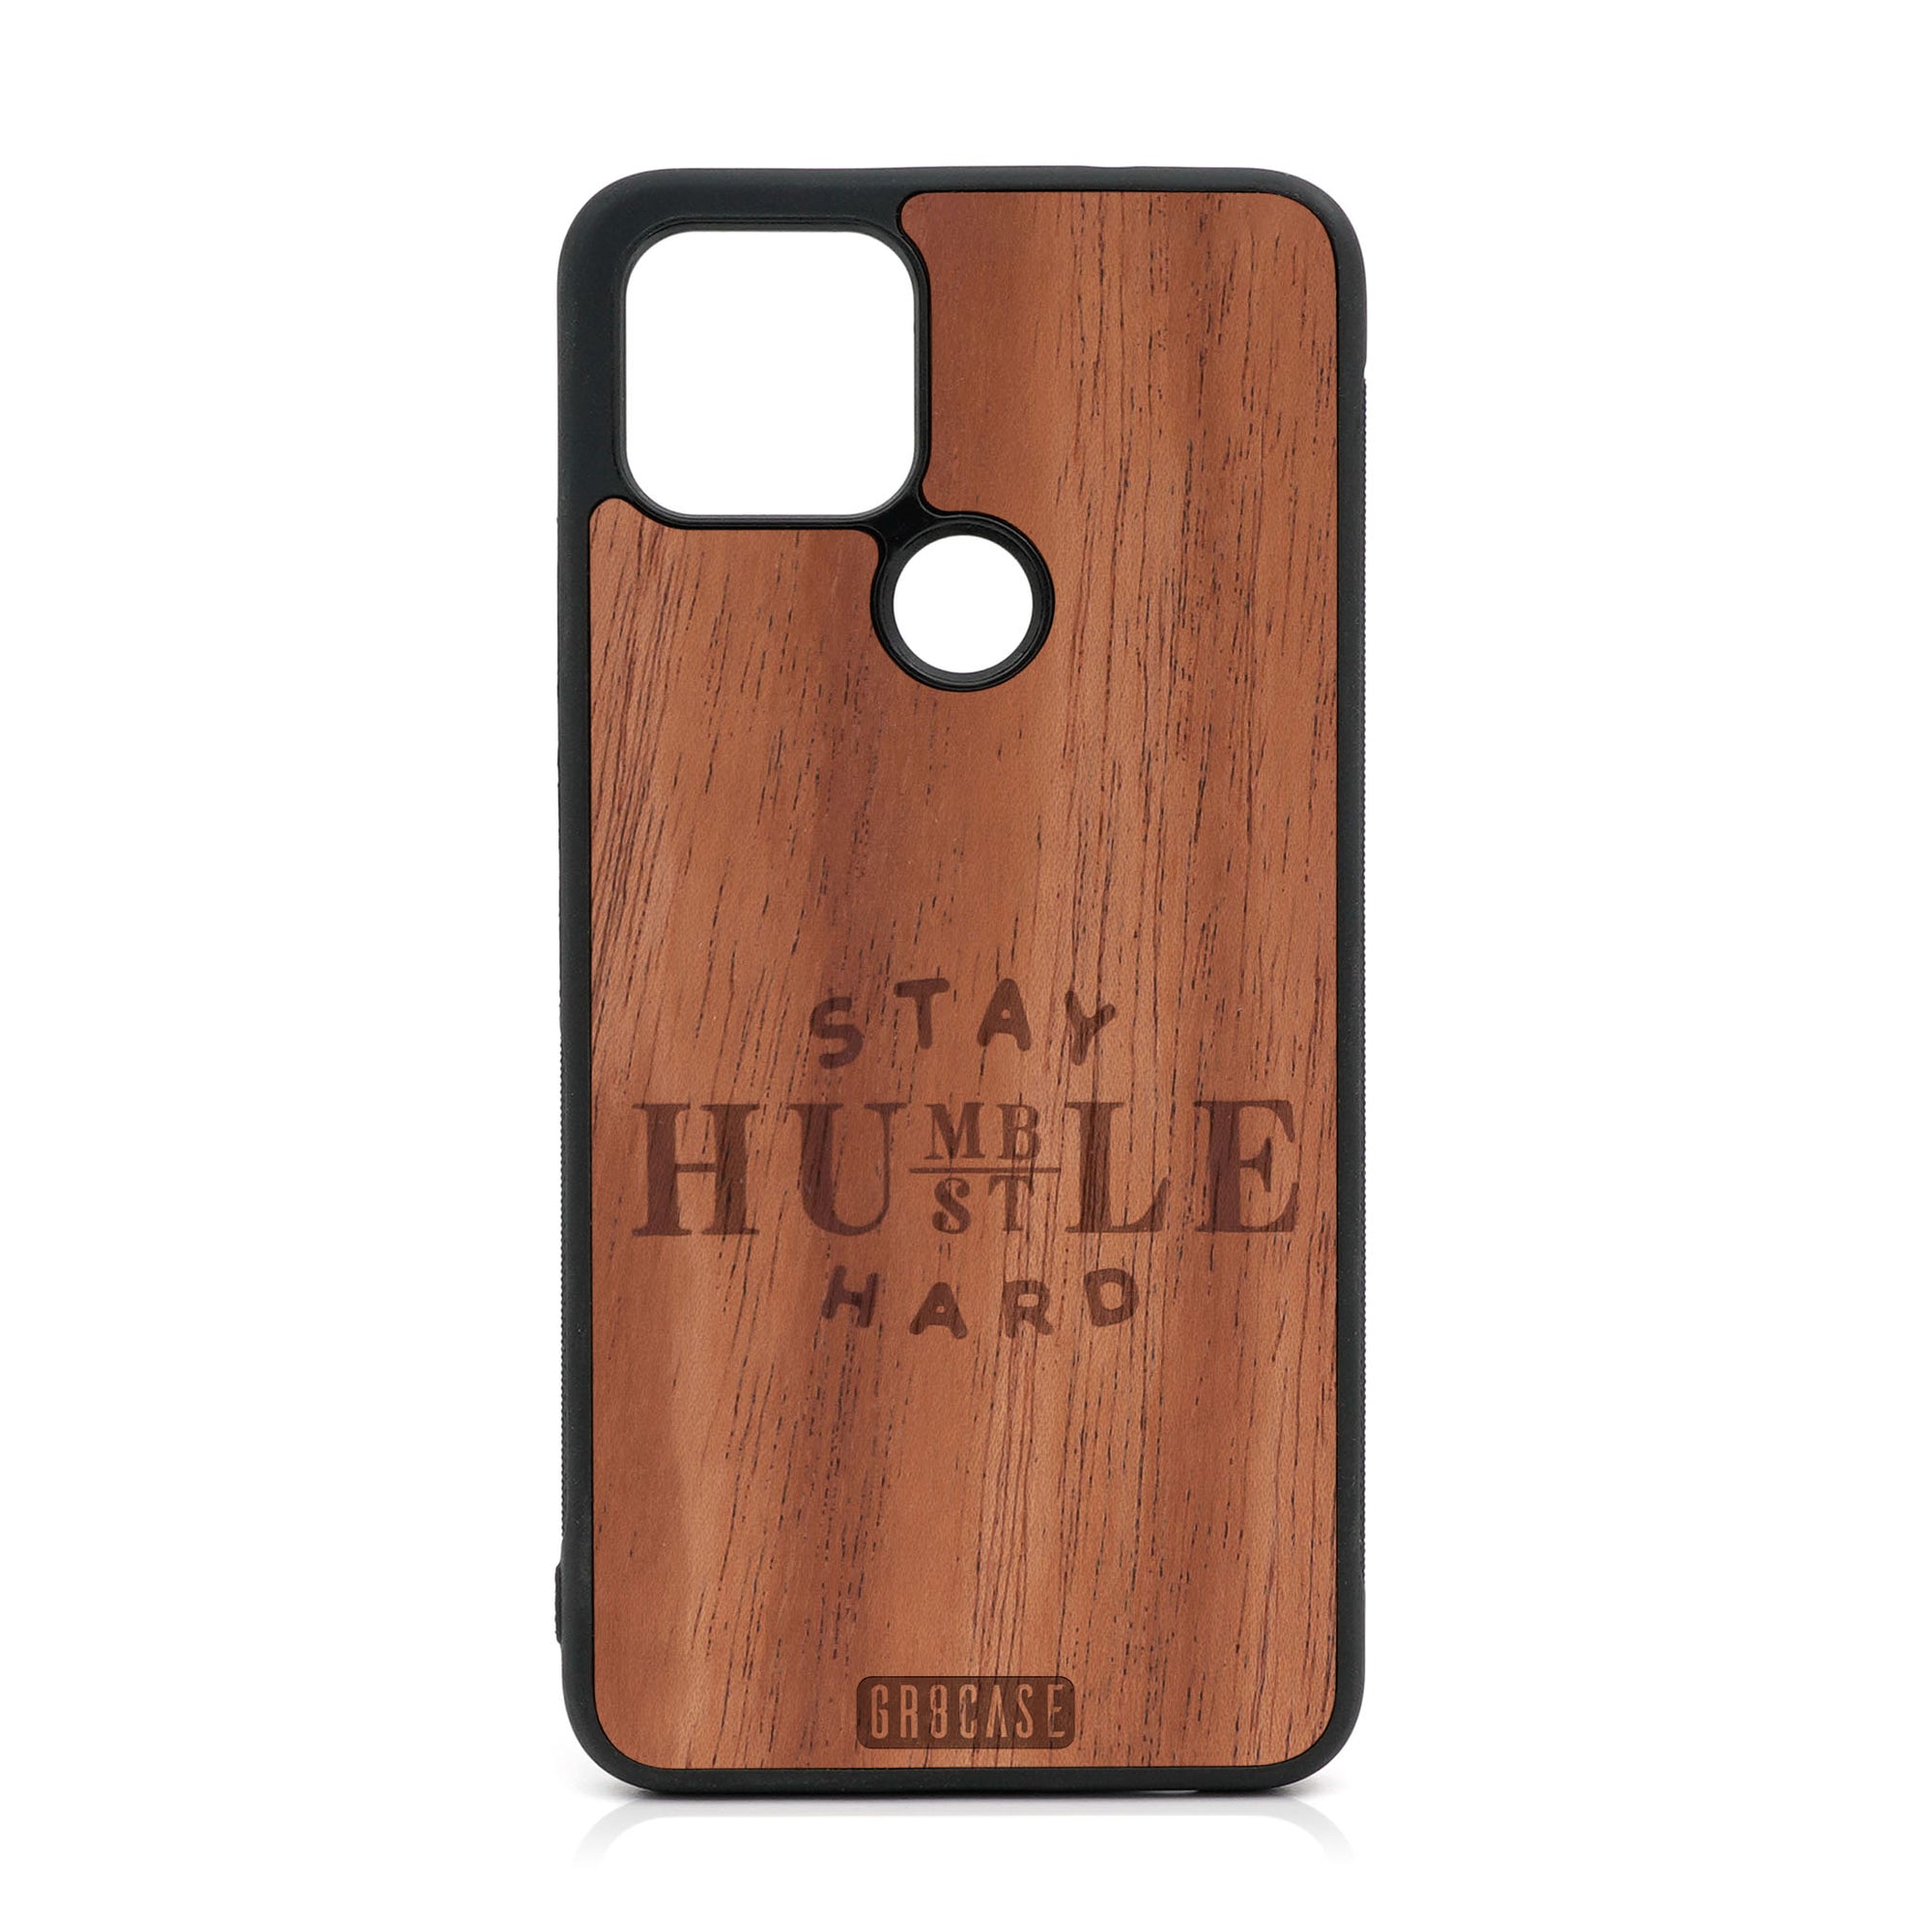 Stay Humble Hustle Hard Design Wood Case For Google Pixel 5 XL/4A 5G